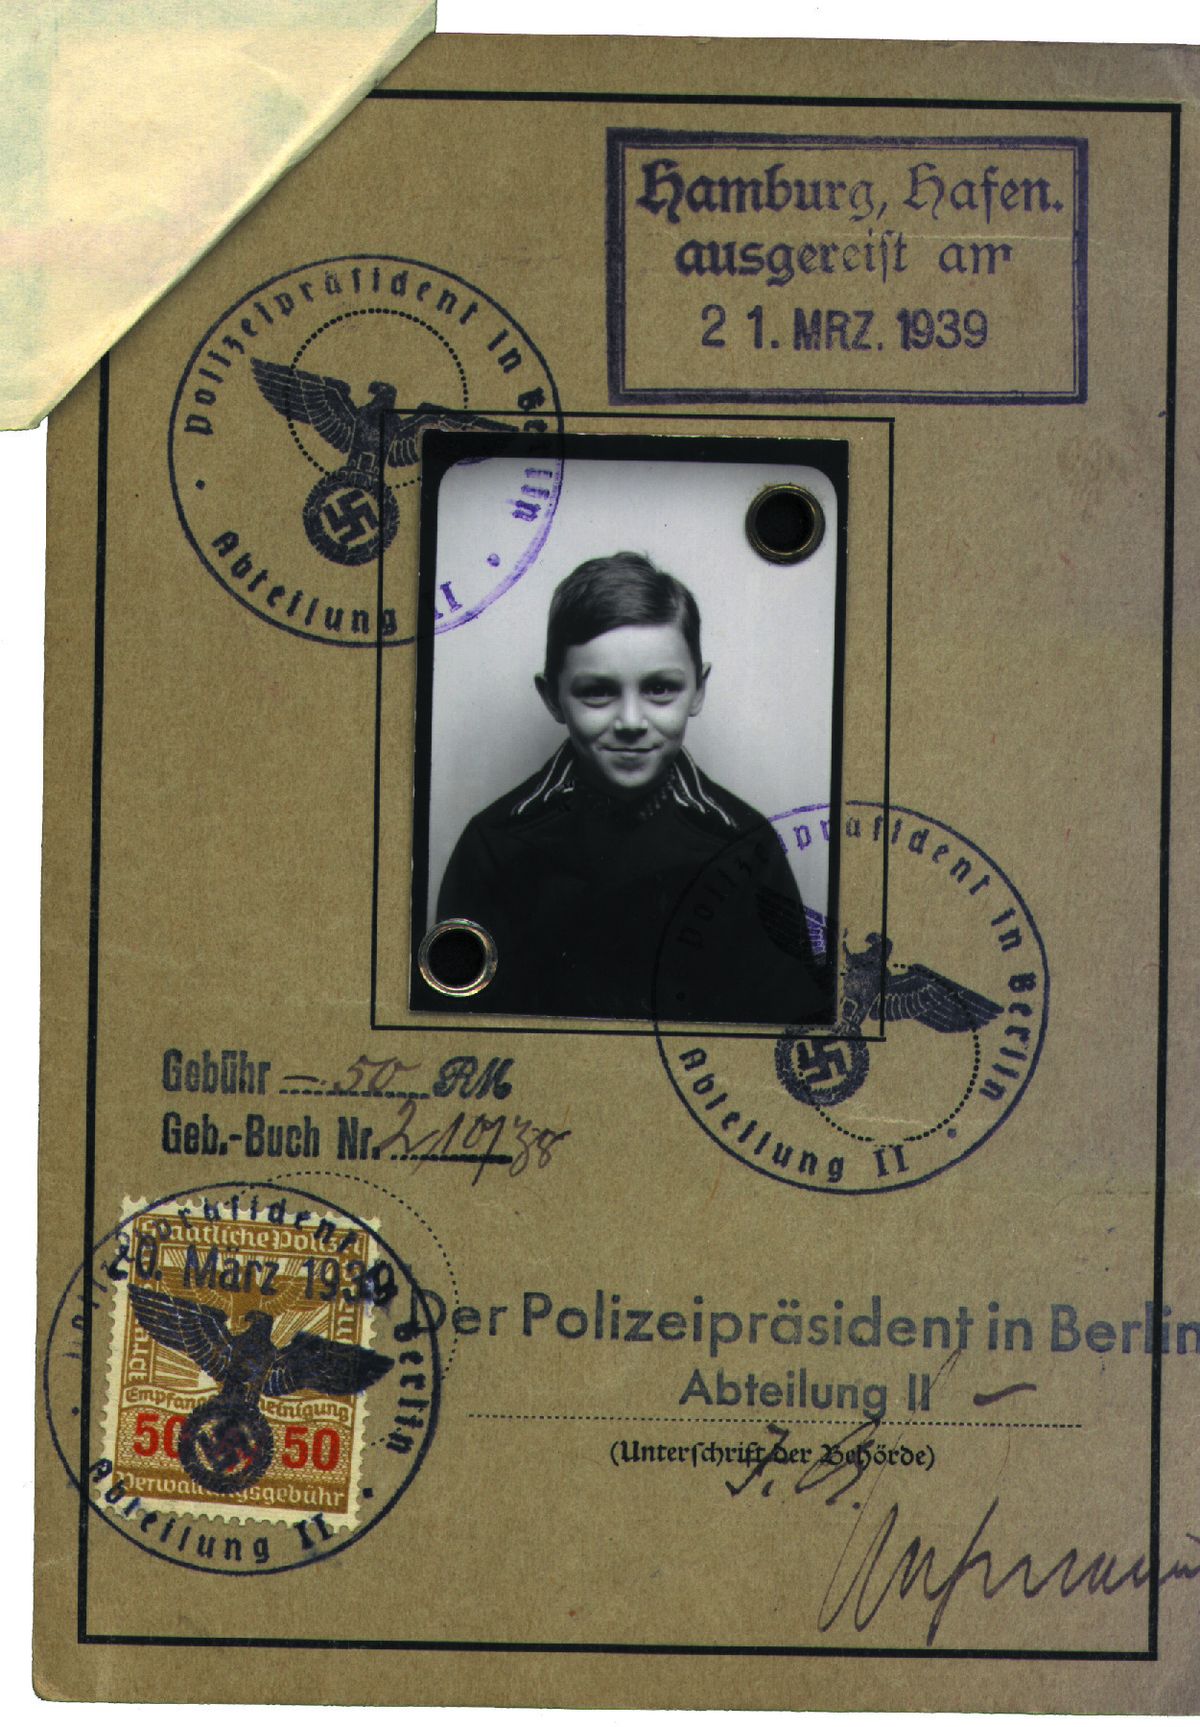 Steve Adler’s passport bears the stamps marking his exit from Germany in a pre-World War II rescue effort known as Kindertransport. Adler was 8. Now he’s 83 and lives in Seattle.